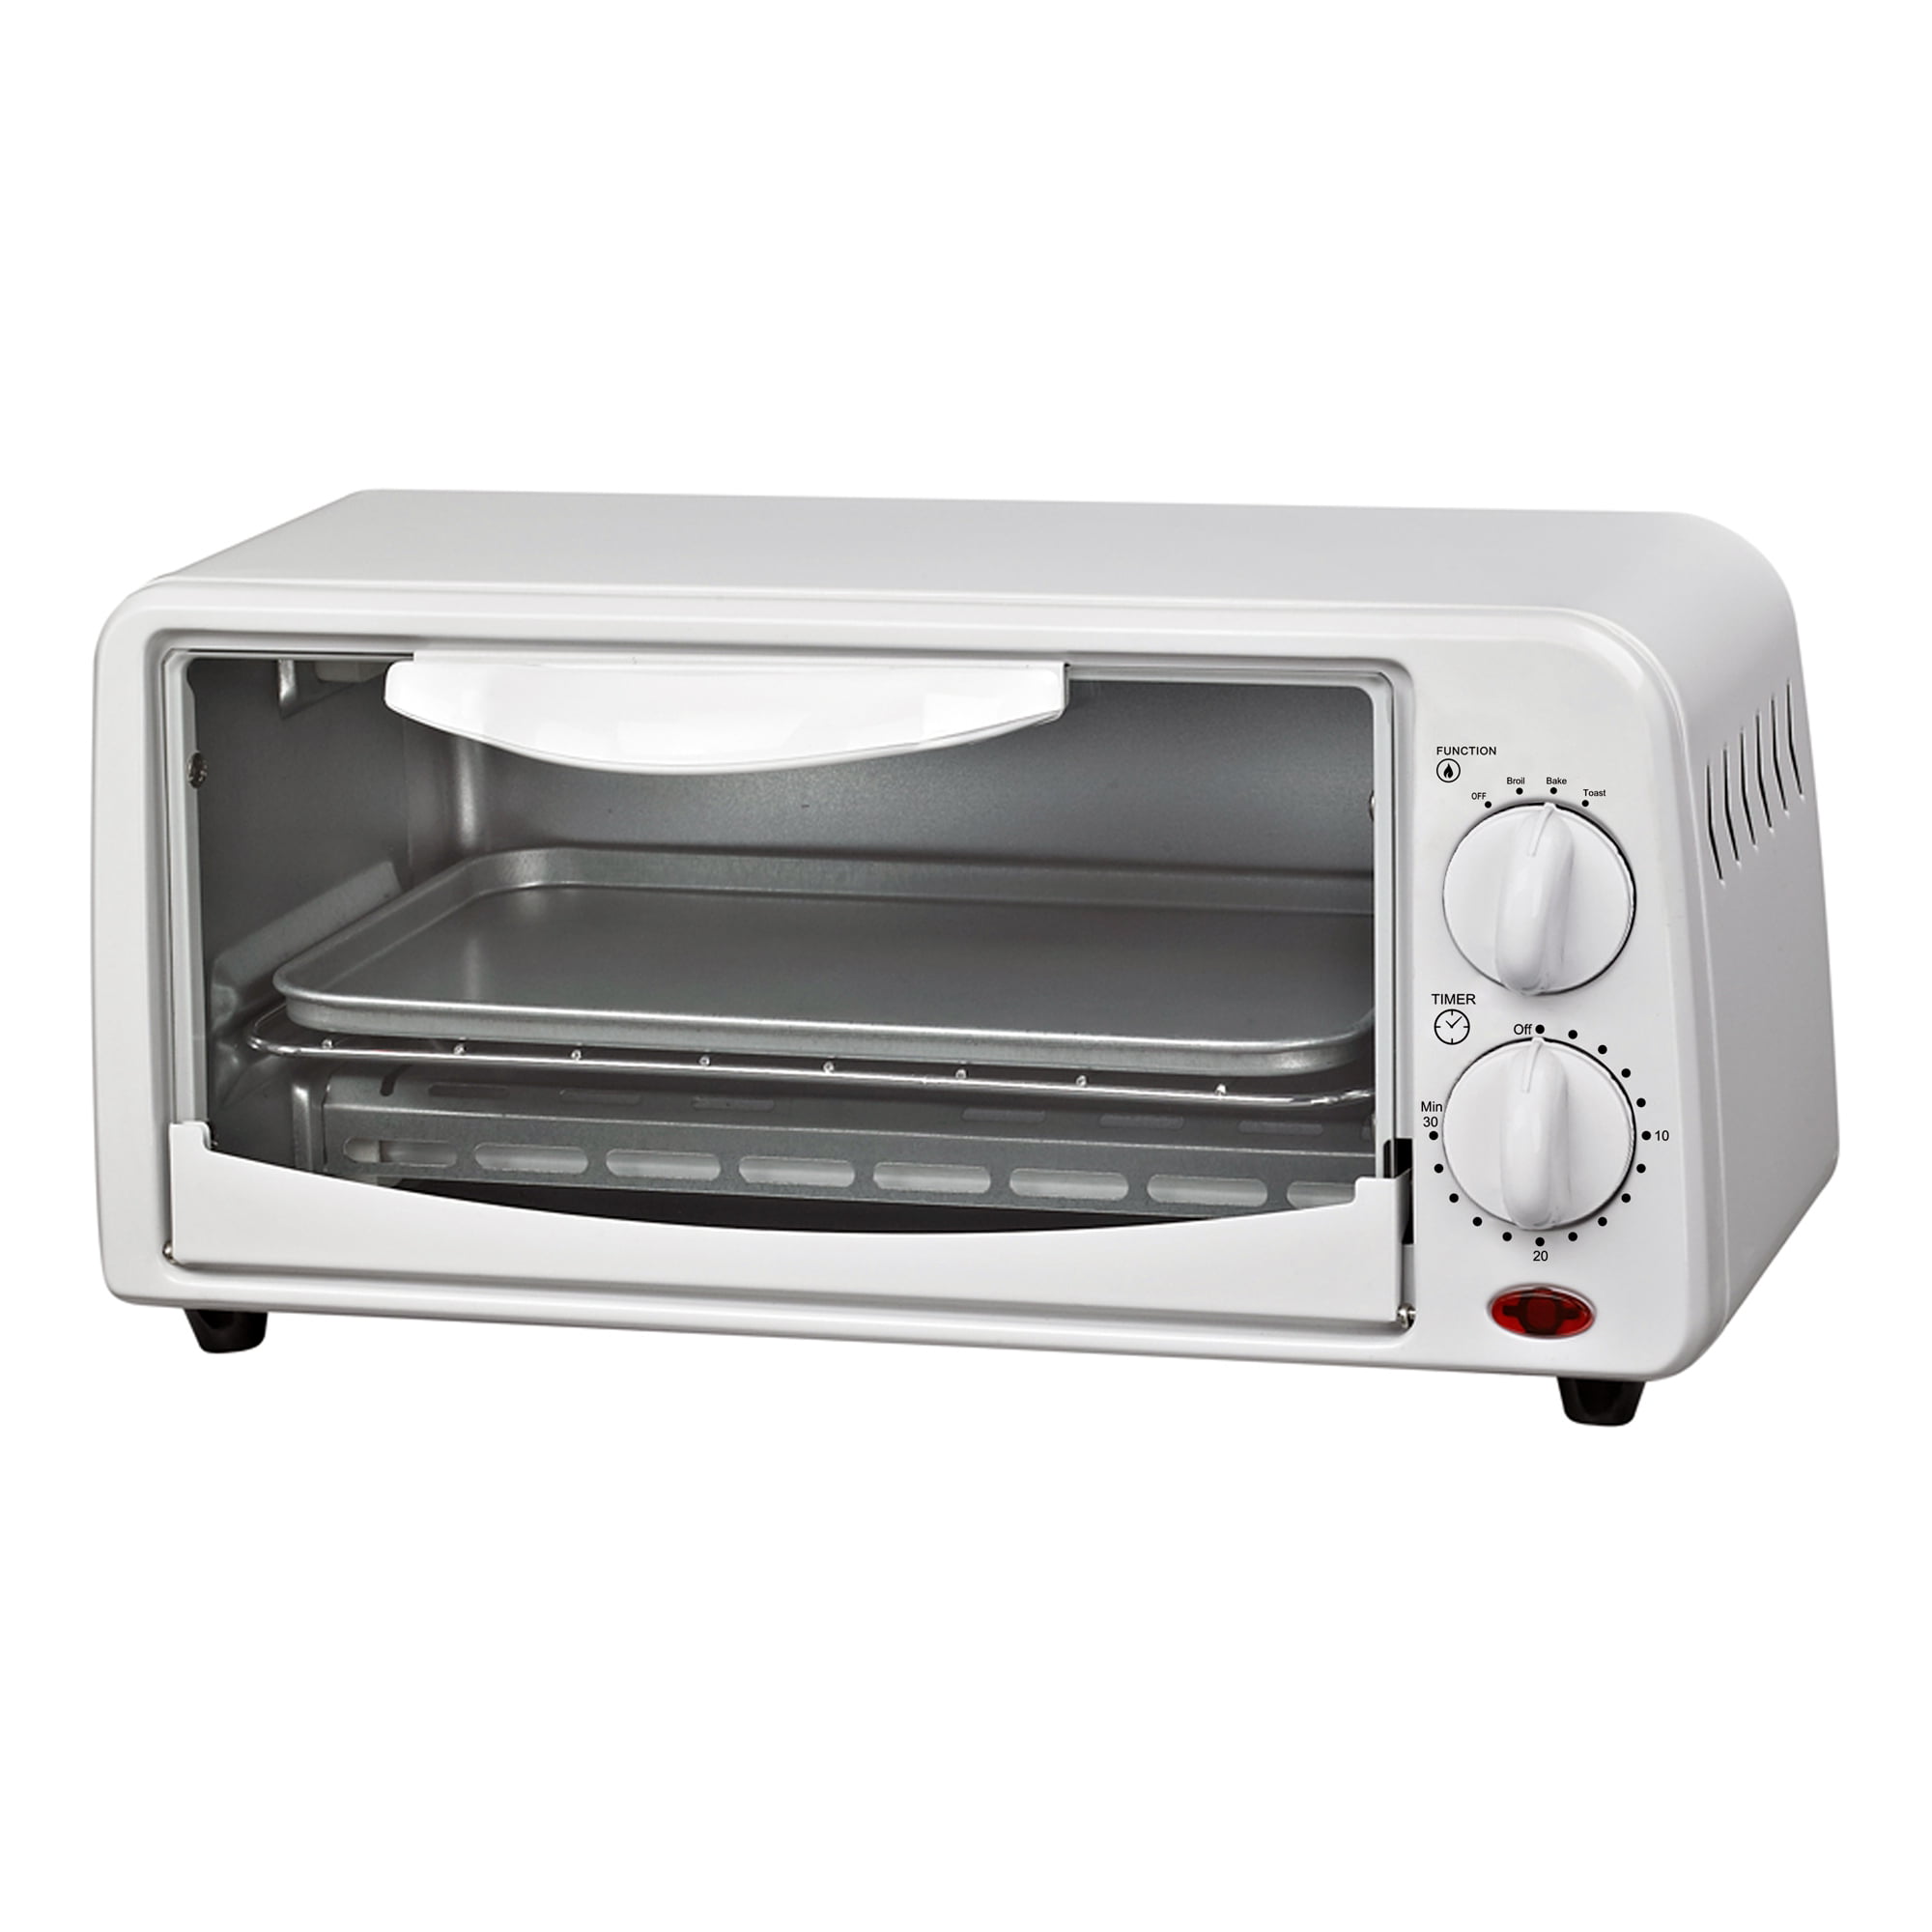 Courant TO621W Compact Toaster Oven White - Walmart.com